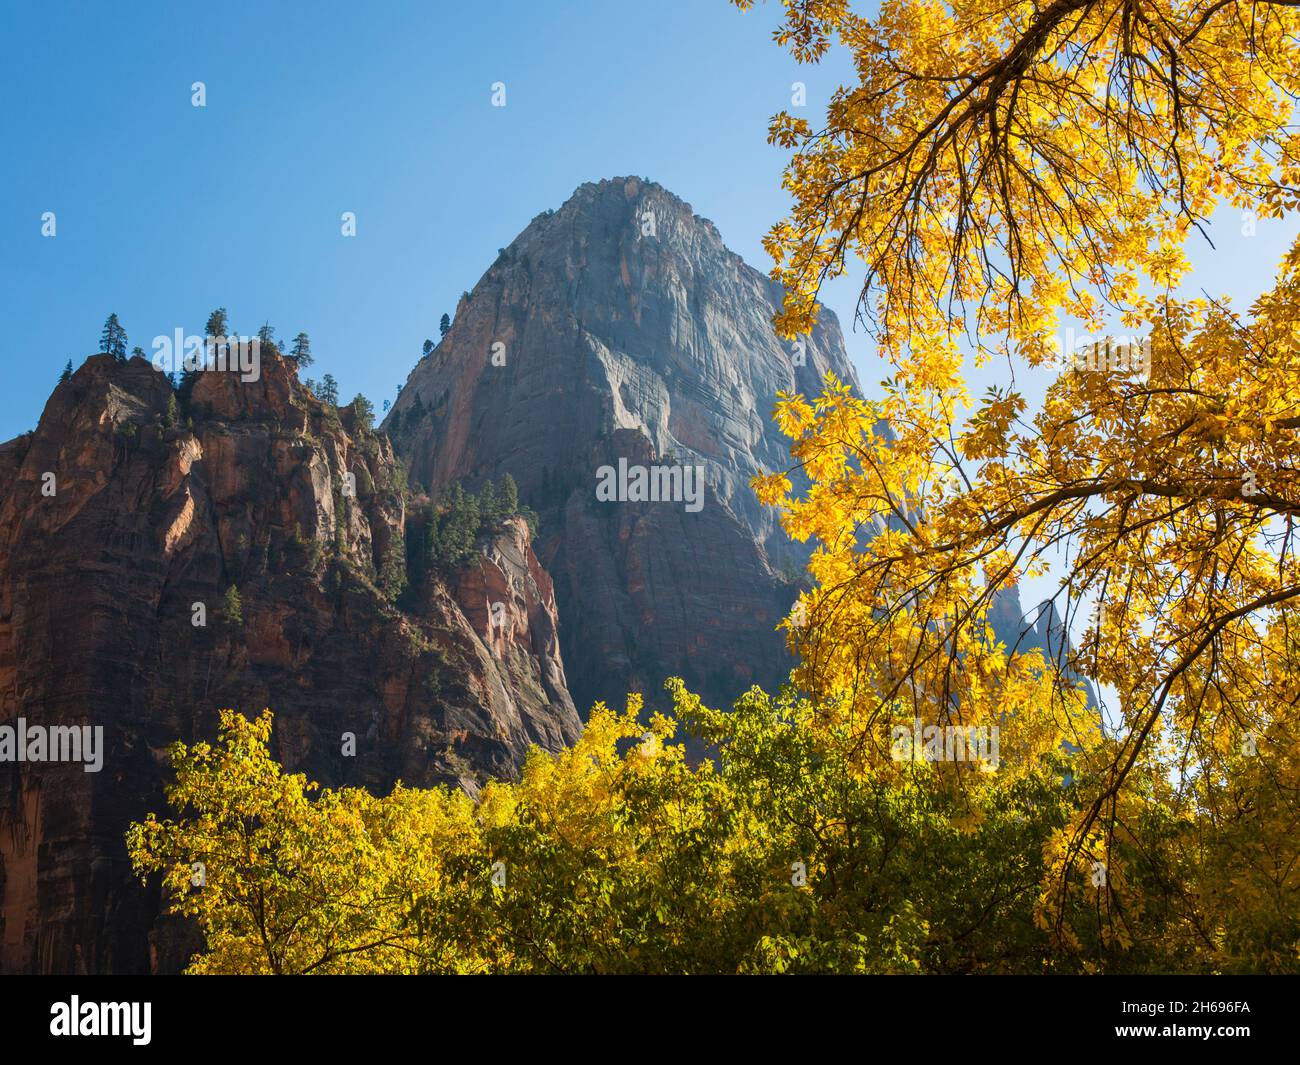 Zion National Park, Utah, USA. The majestic north face of the Great White Throne framed by golden foliage, autumn. Stock Photo